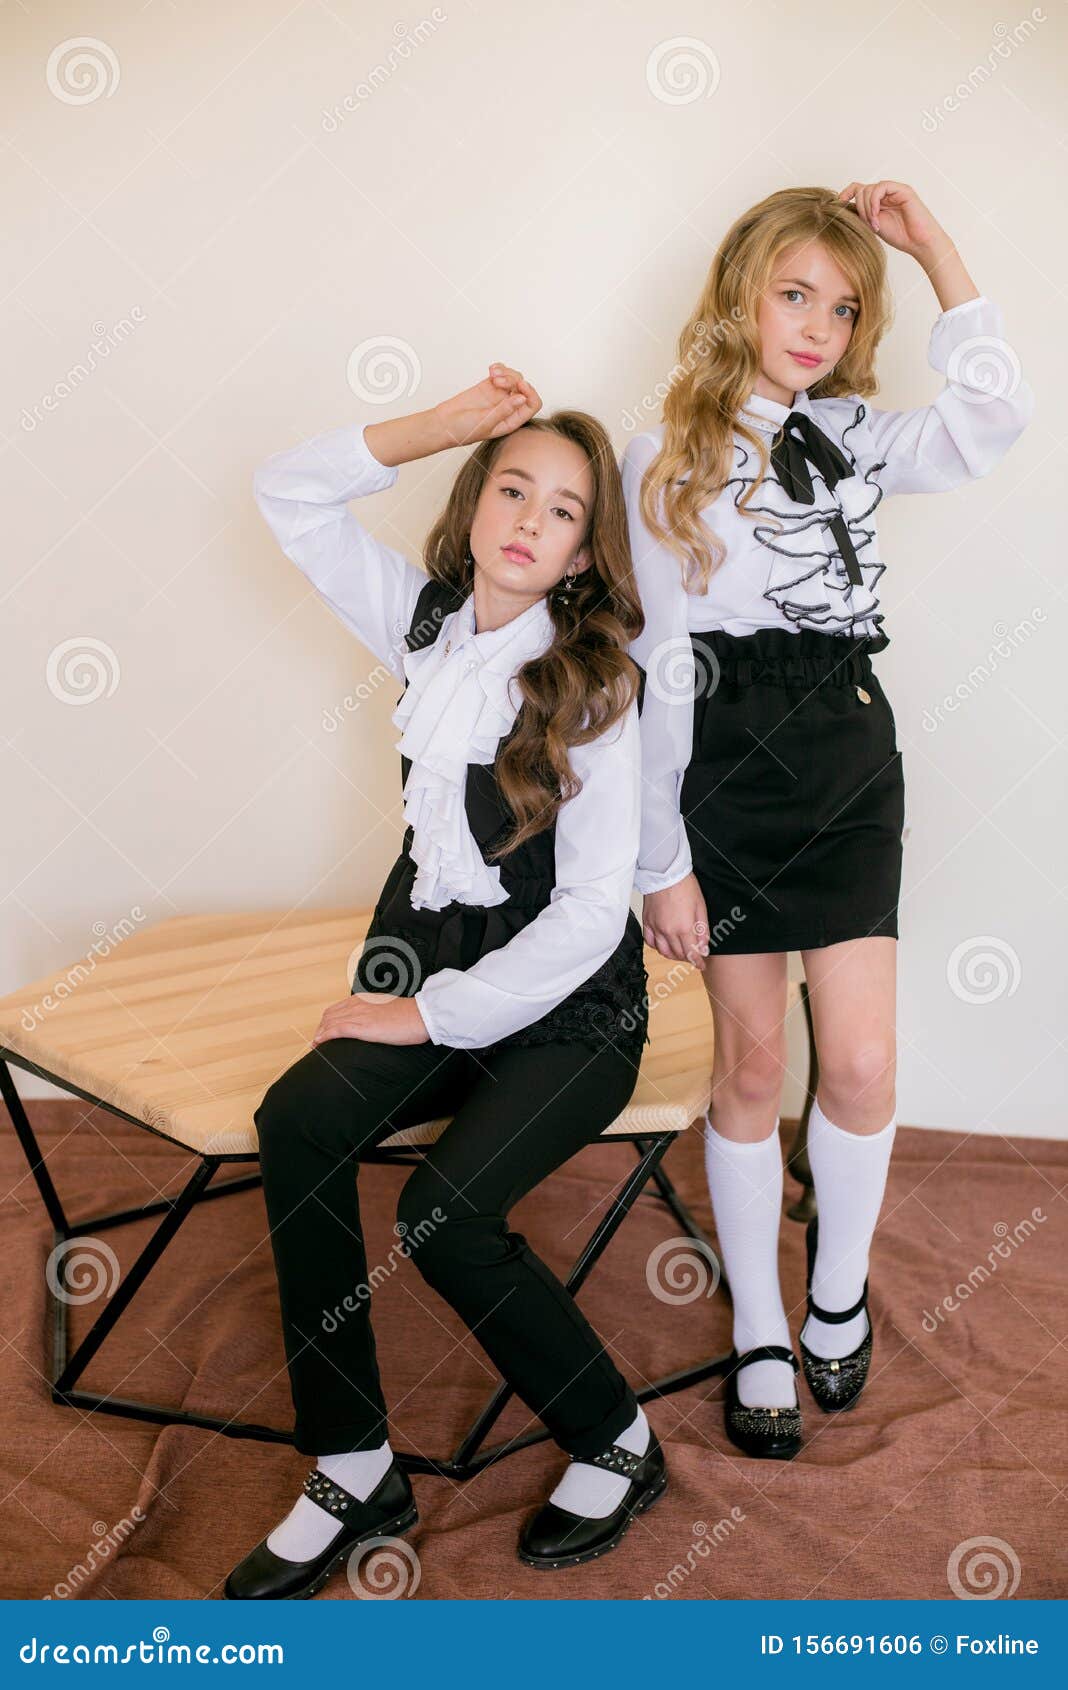 Two Cute Girls Schoolgirls with Long Curly Hair in Fashionable School ...